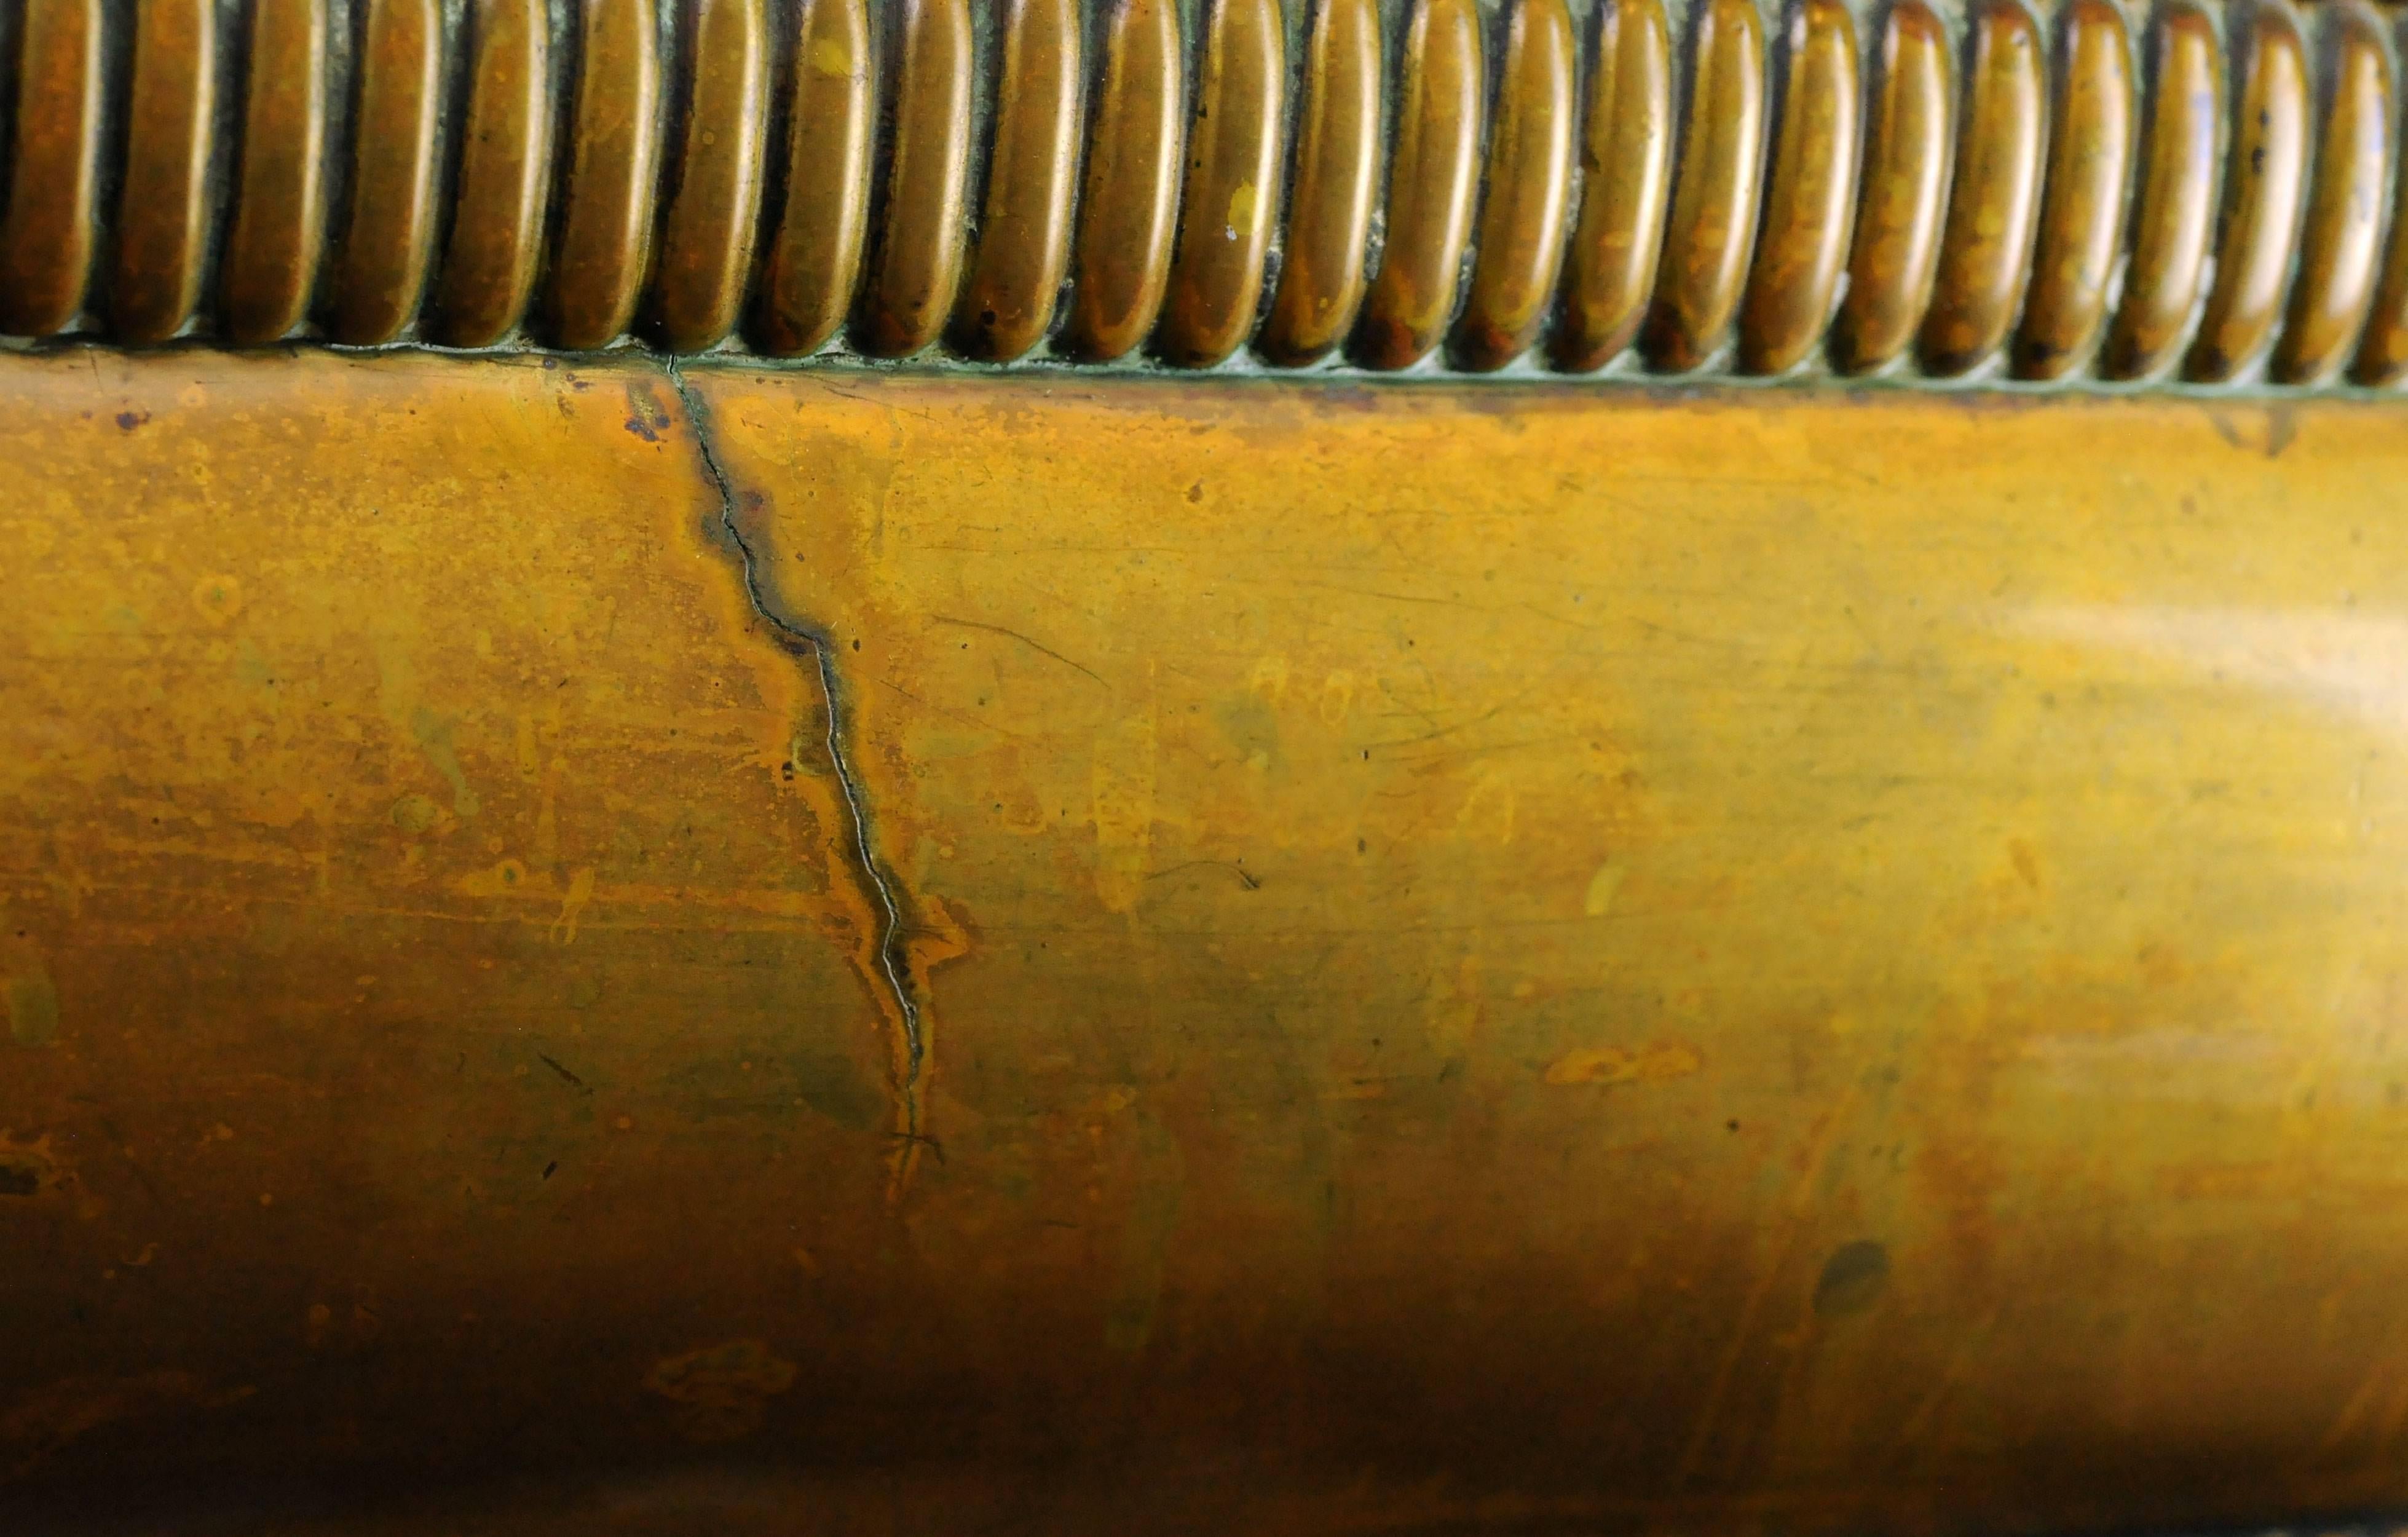 This heavy cast brass fireplace fender is complete with lion's paw feet and has a simple and elegant detailing, suitable for many fireplace hearths. A mix of brass and iron underneath, to protect the unit from high heats. The original patina shines